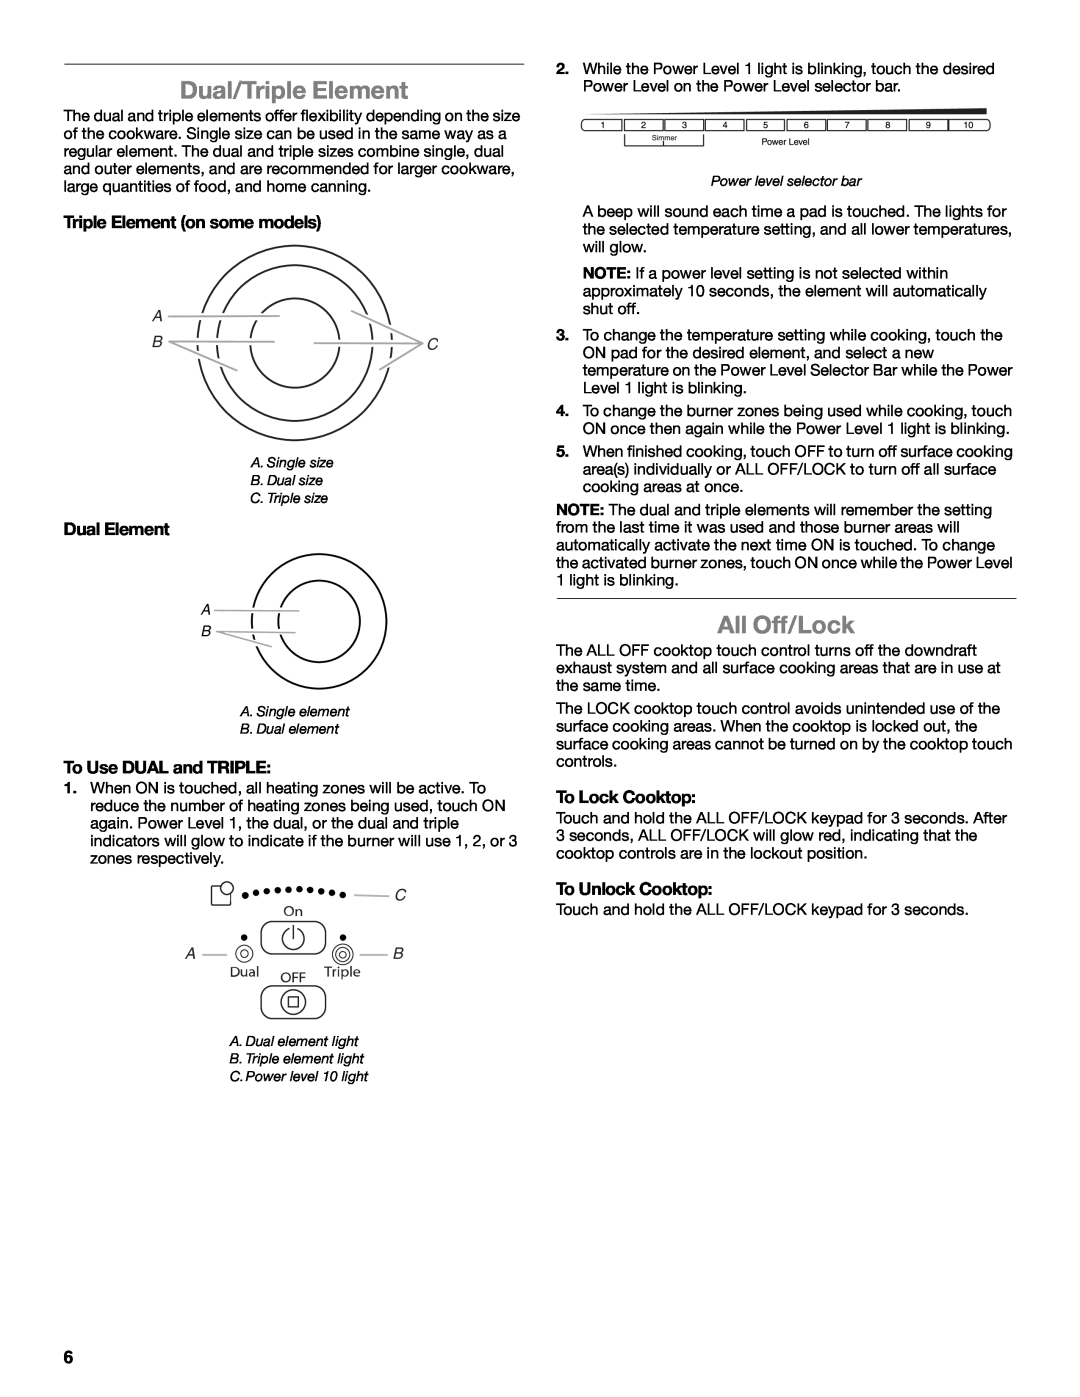 Whirlpool G7CE3034XP manual Dual/Triple Element, All Off/Lock, Triple Element on some models, Dual Element, To Lock Cooktop 